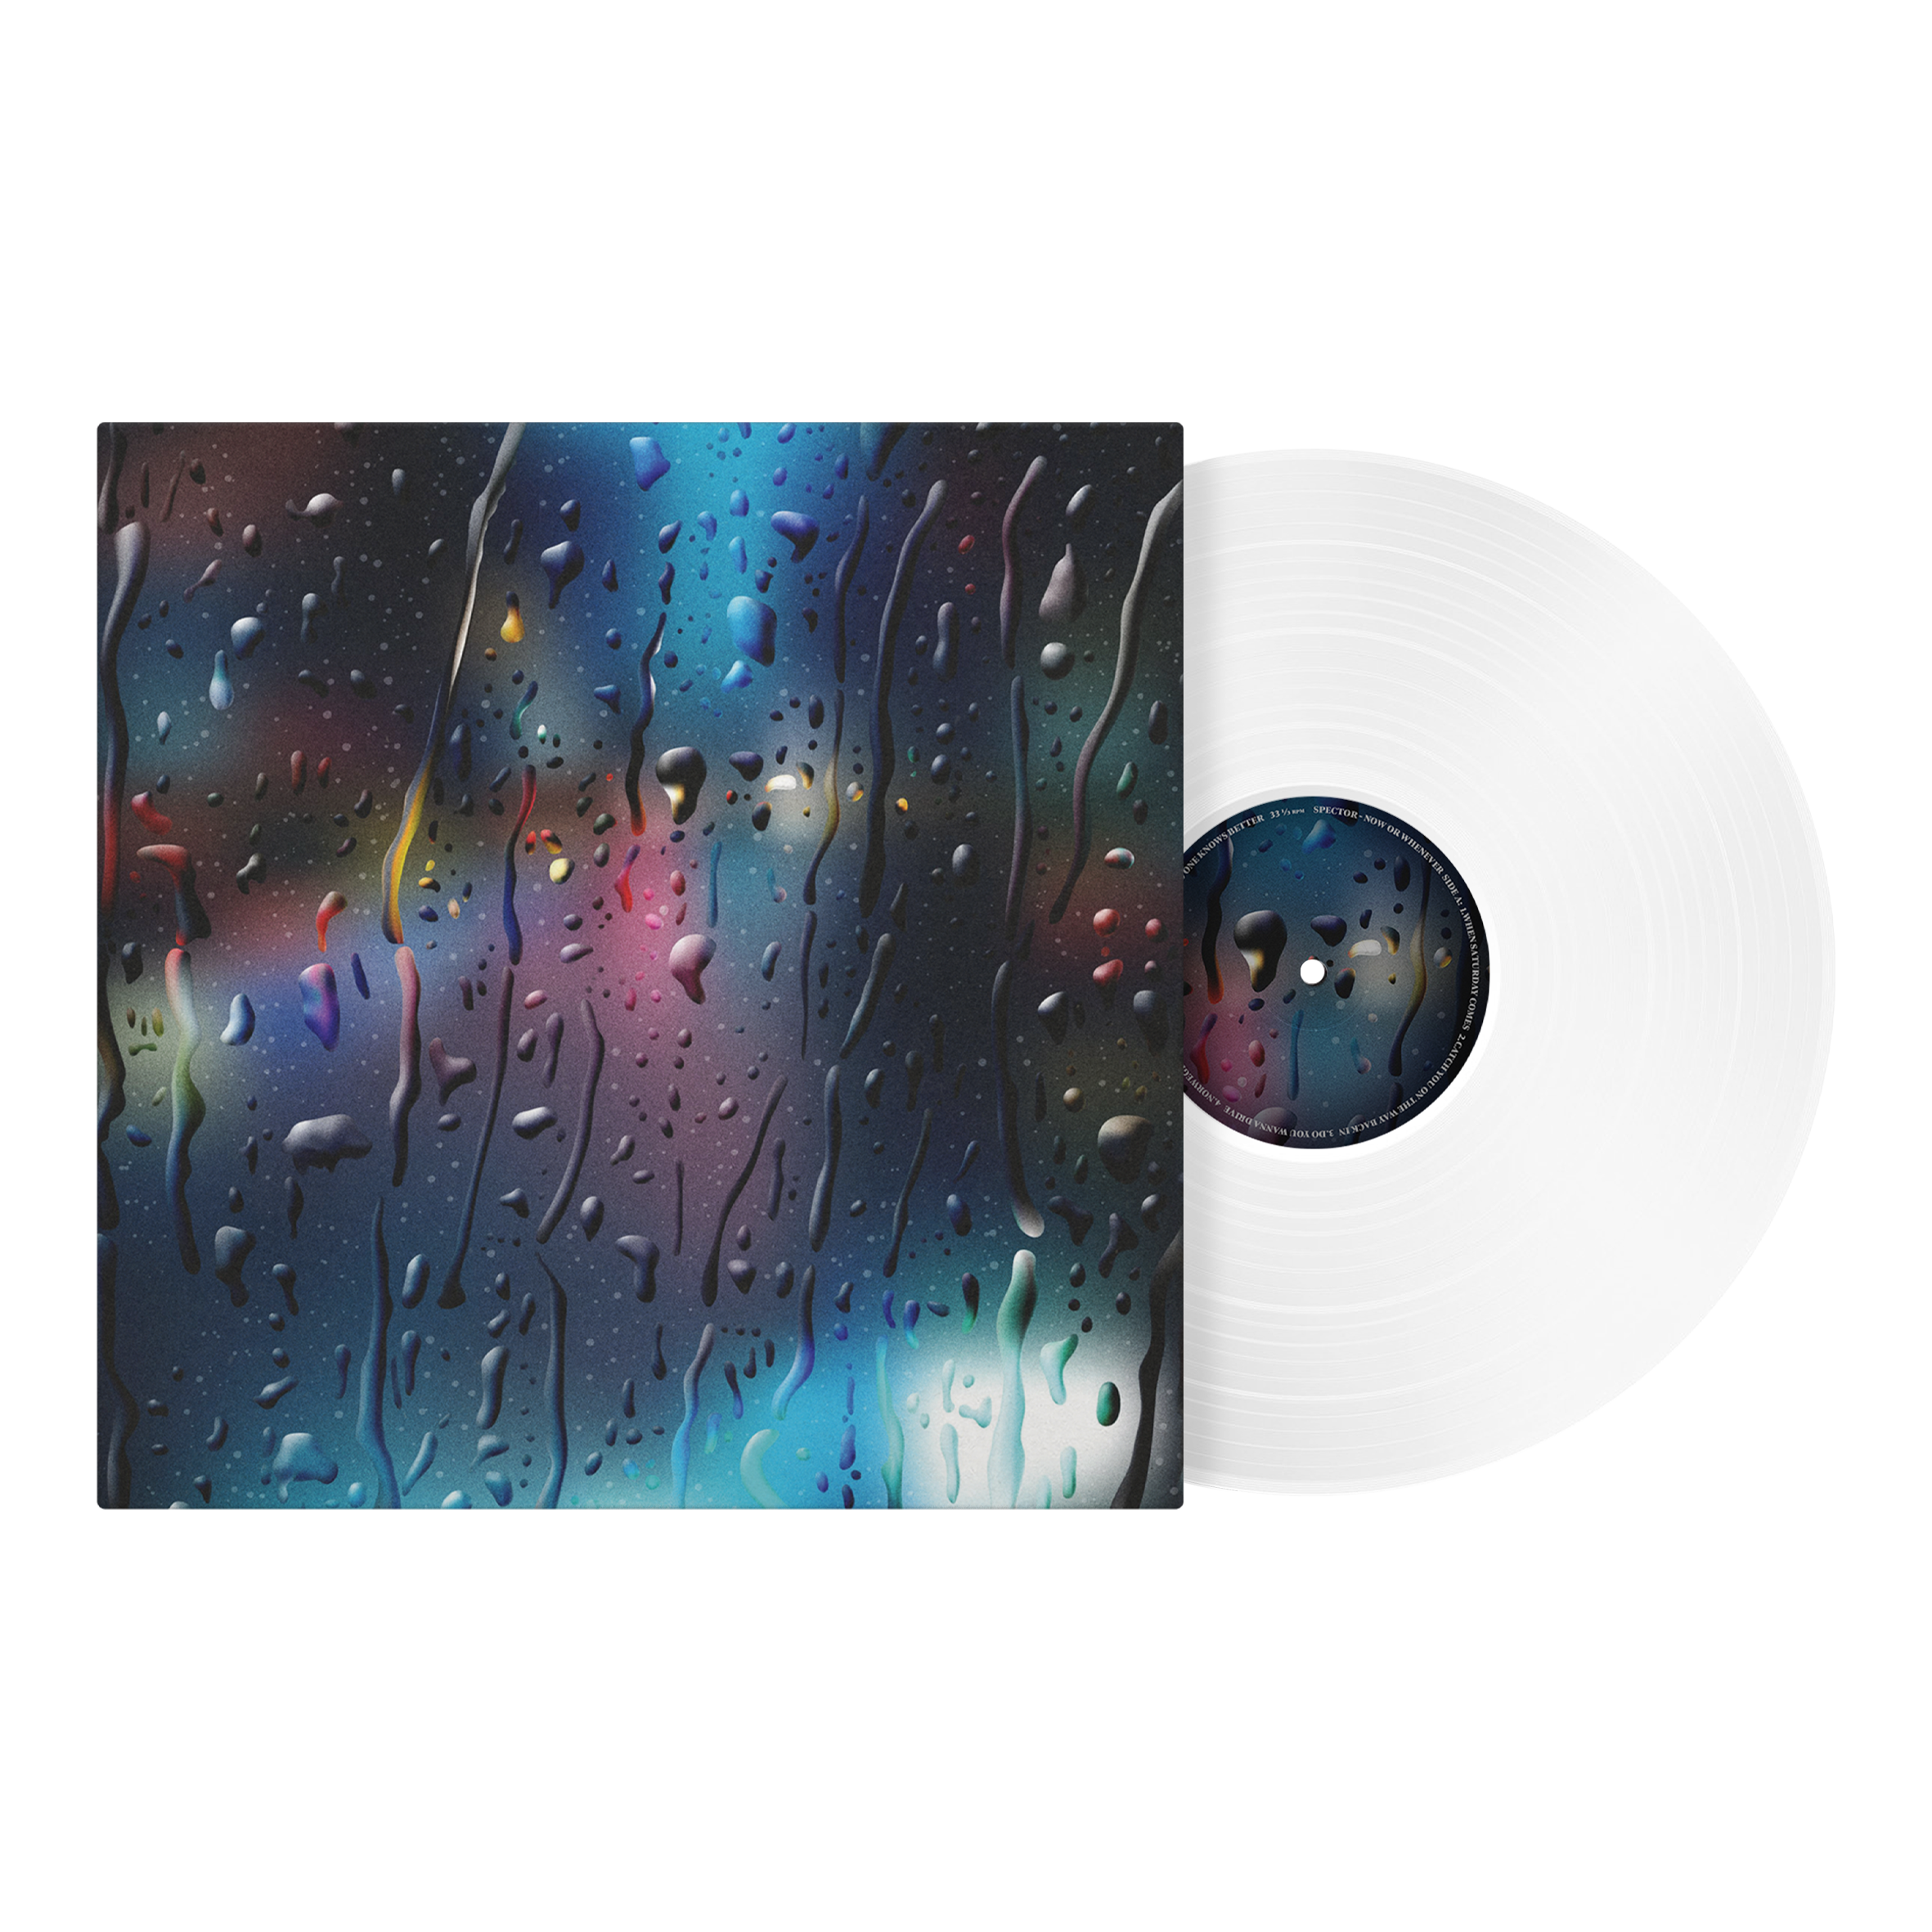 Set It Off - The limited edition pressing of Upside Down on white with blue  splatter vinyl is shipping now from setitoff.merchnow.com!